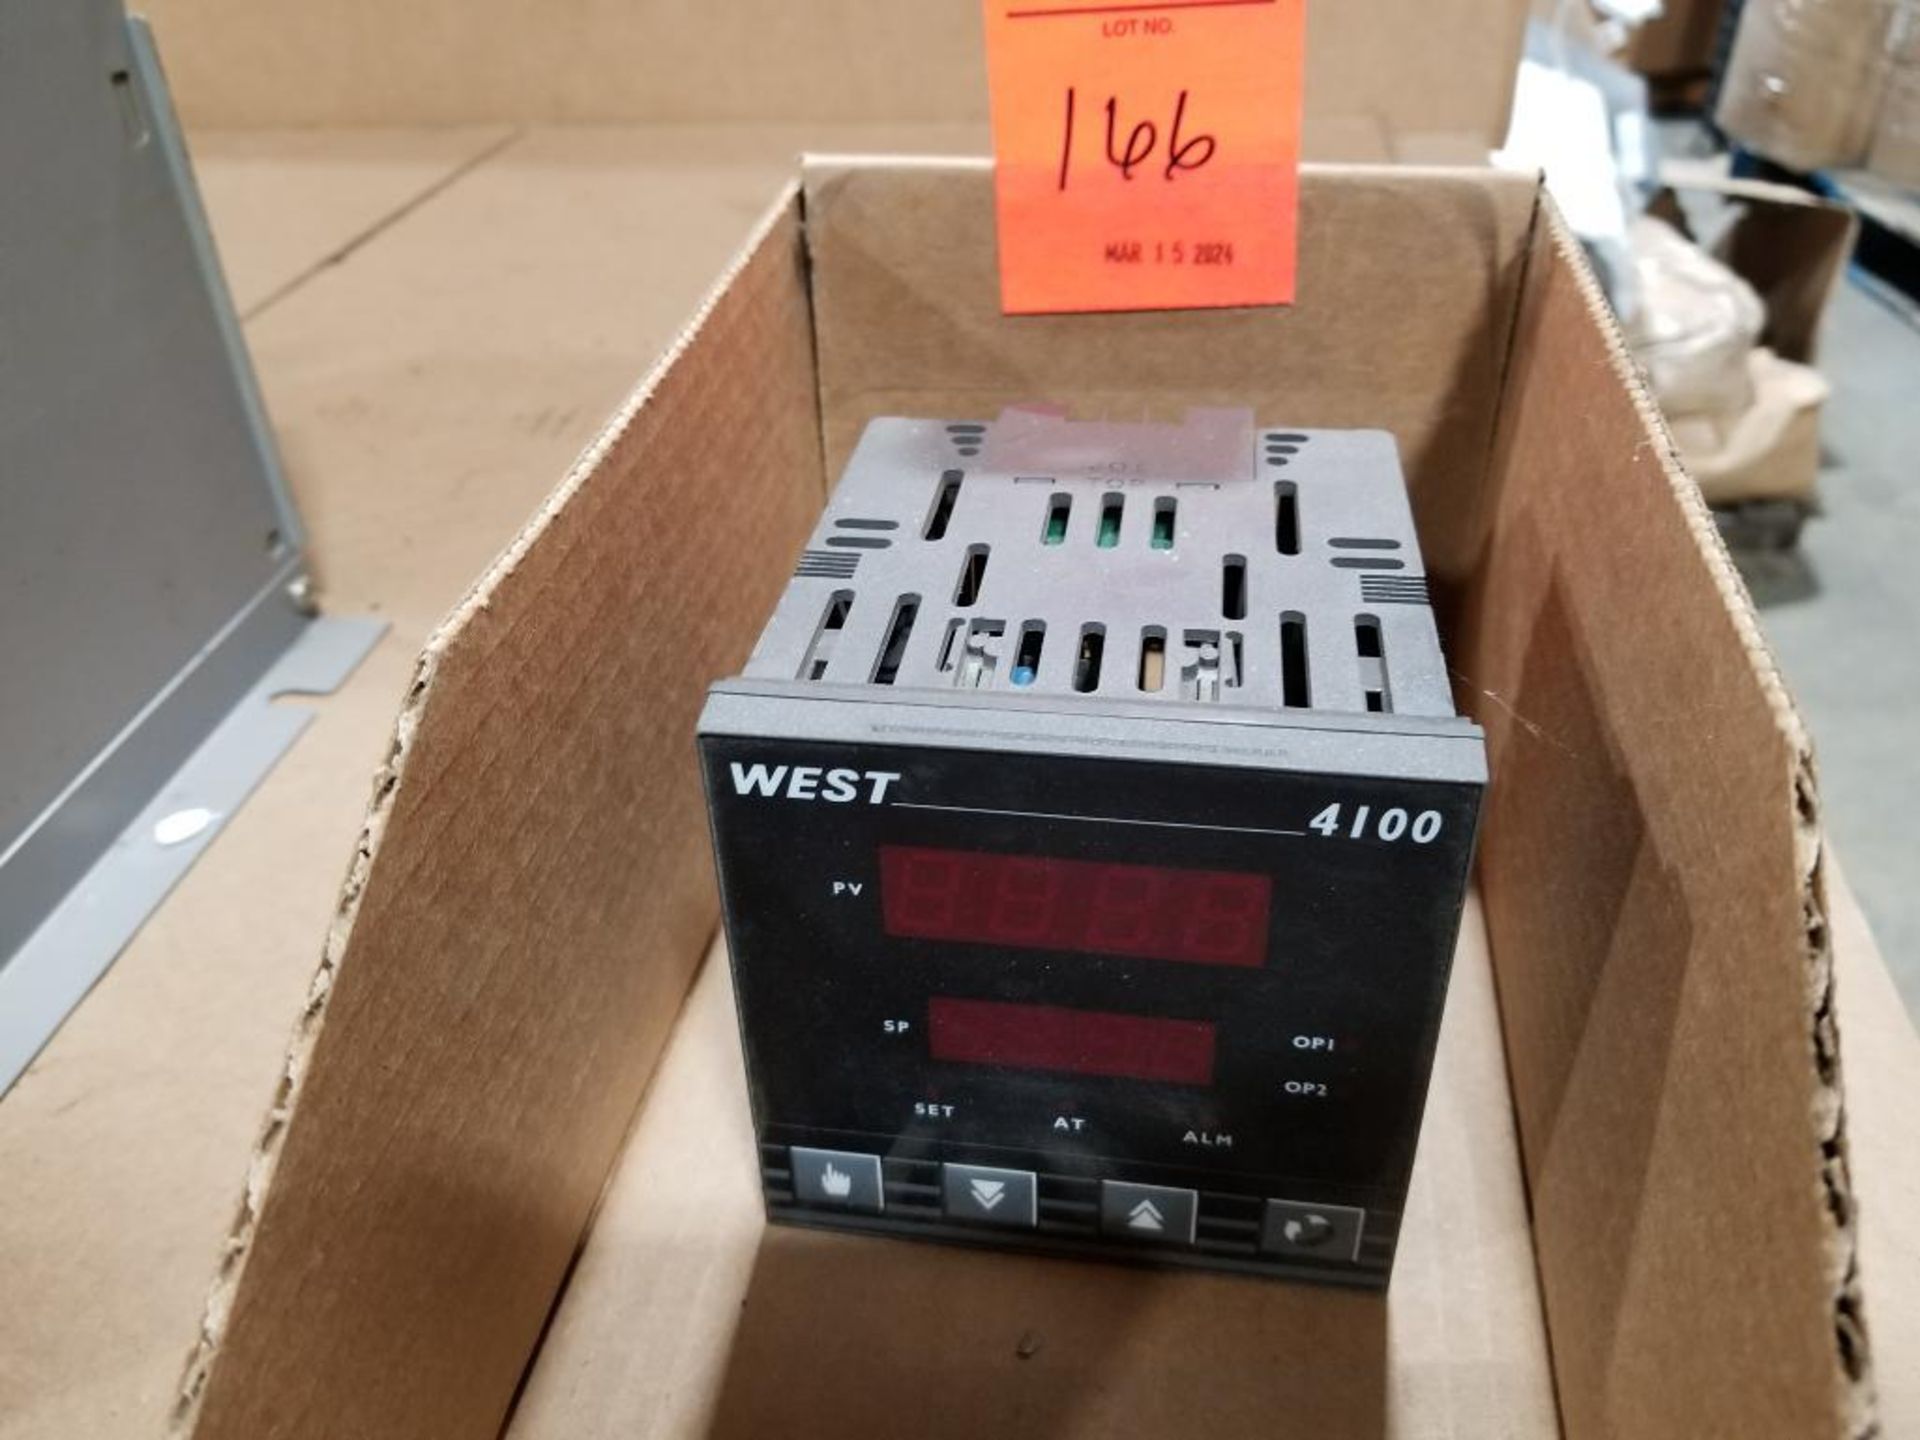 West controller. Series 4100. Part number N4101.